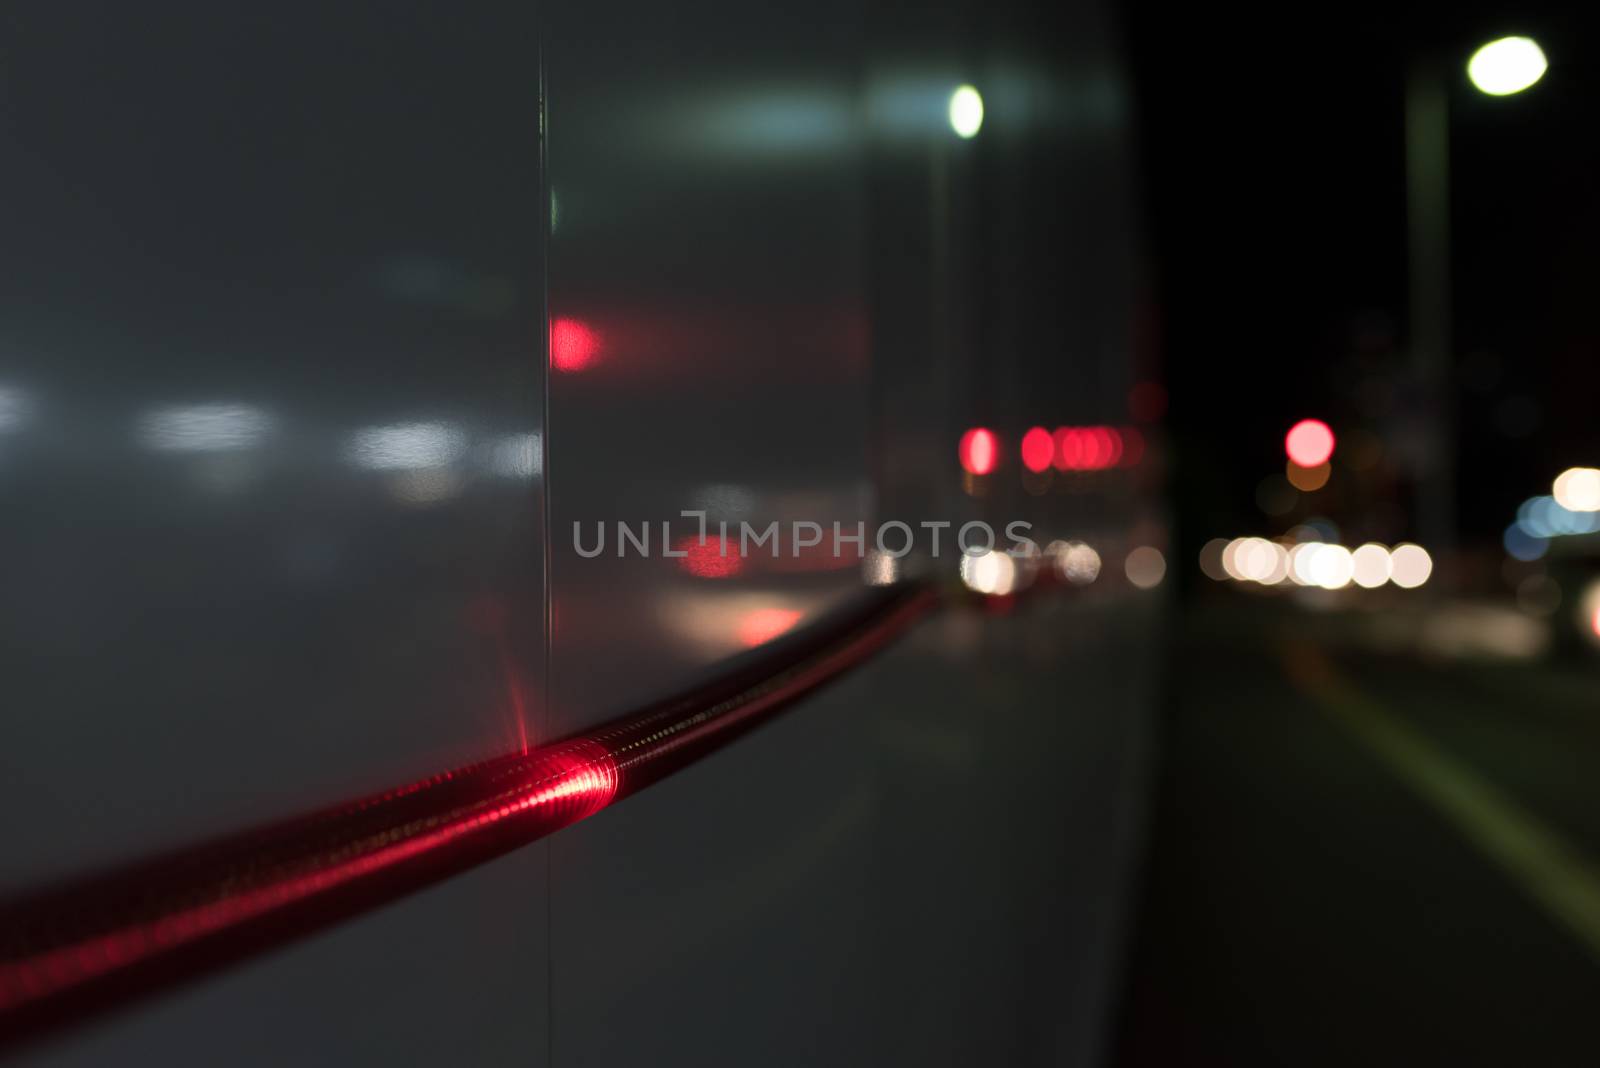 A close up shot of a red rope light going along a wall outside of a construction area at night with cars' tail lights blurred in the dark background.